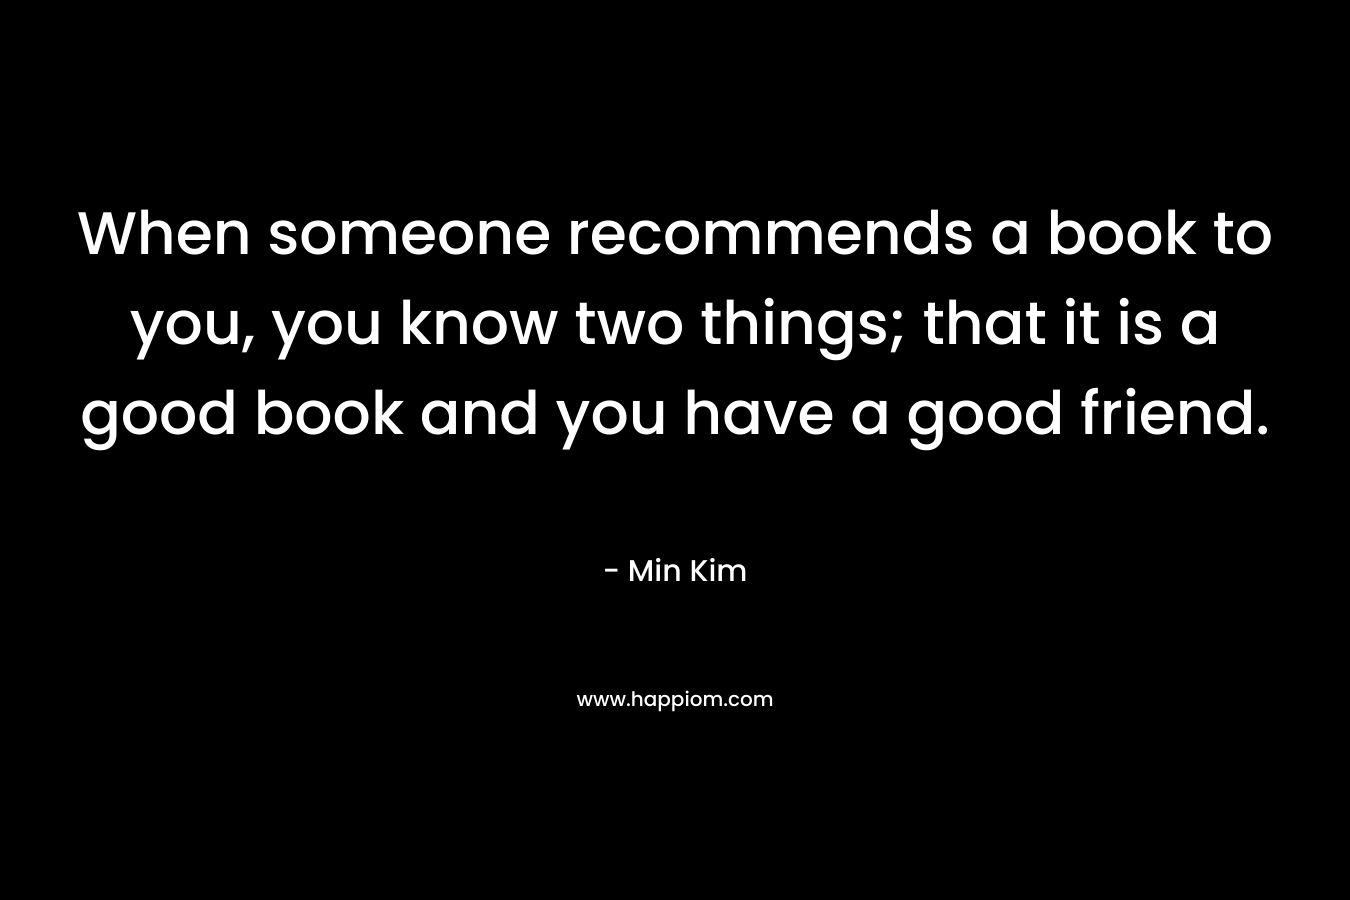 When someone recommends a book to you, you know two things; that it is a good book and you have a good friend.